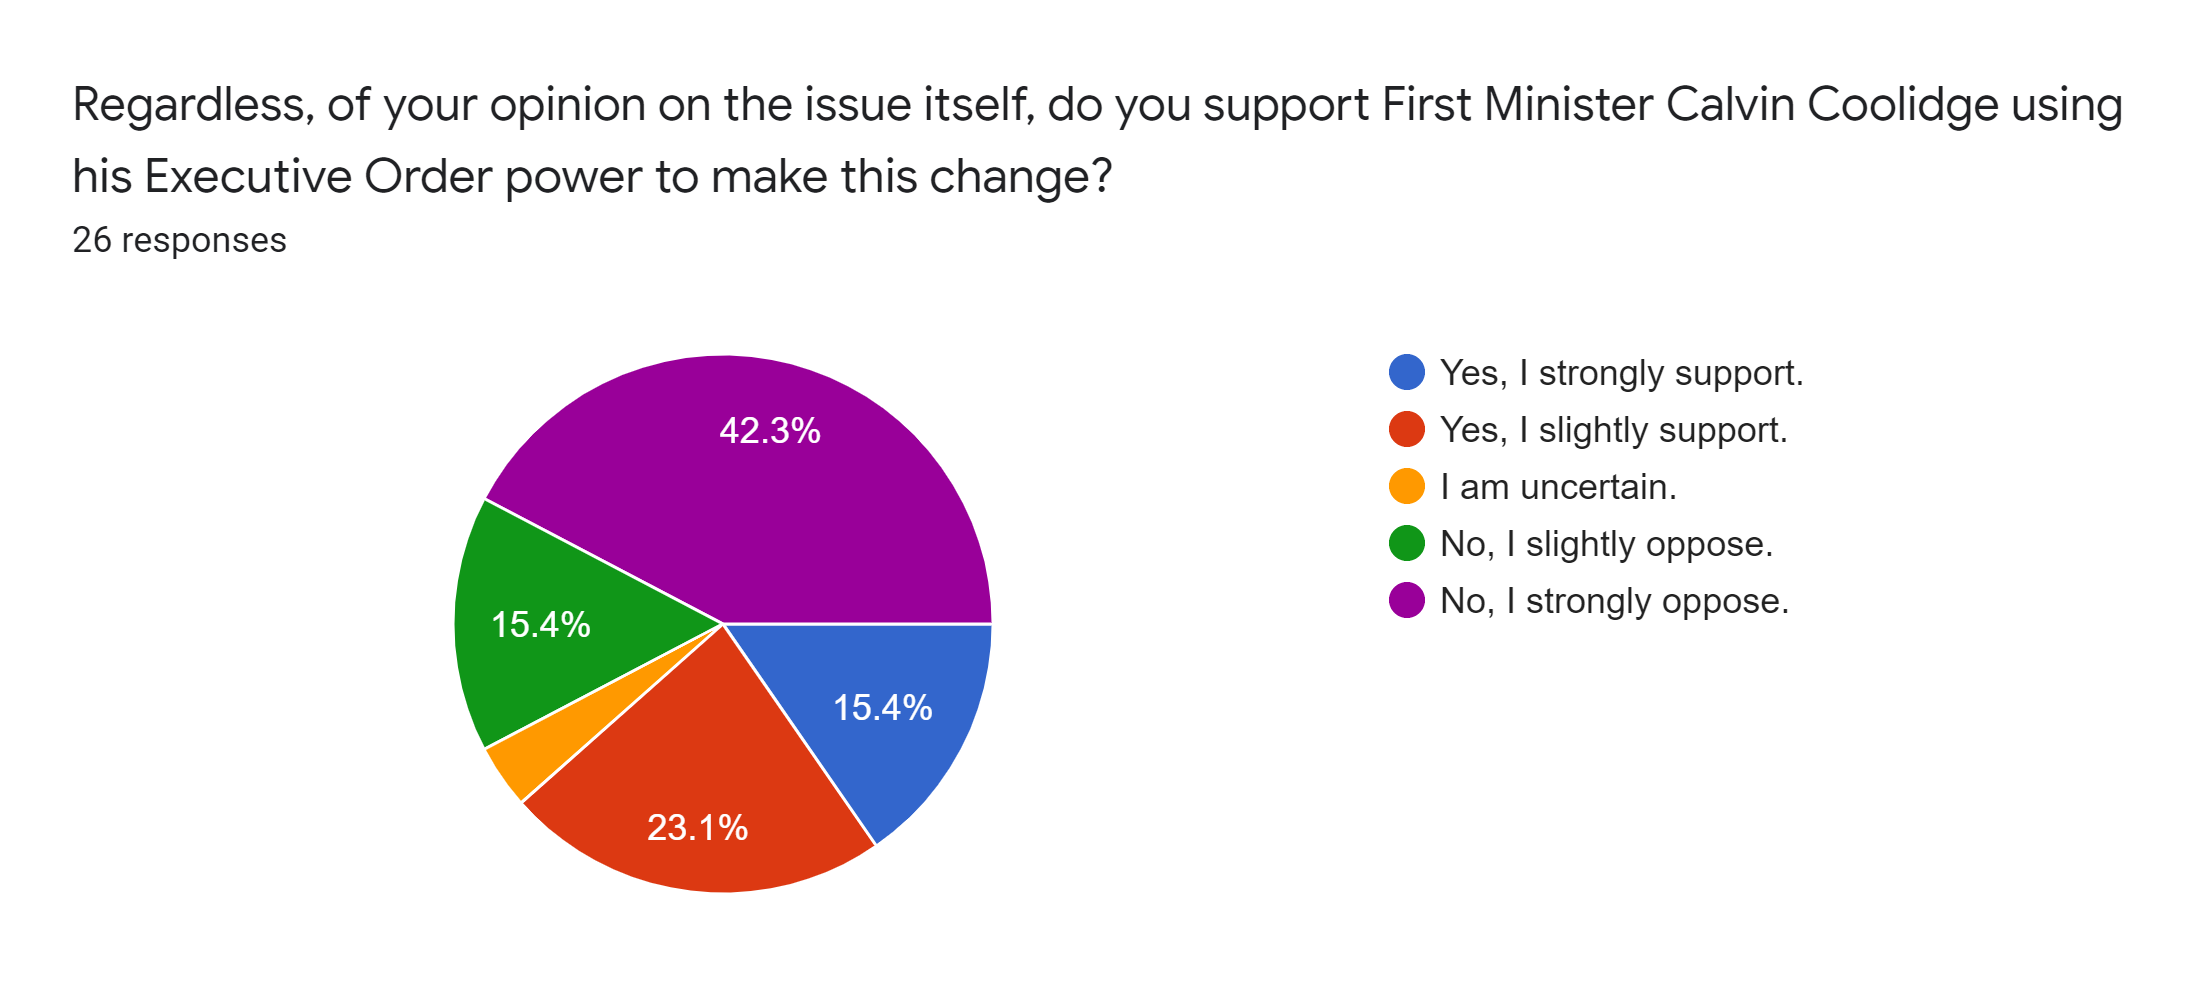 Forms response chart. Question title: Regardless, of your opinion on the issue itself, do you support First Minister Calvin Coolidge using his Executive Order power to make this change?. Number of responses: 26 responses.